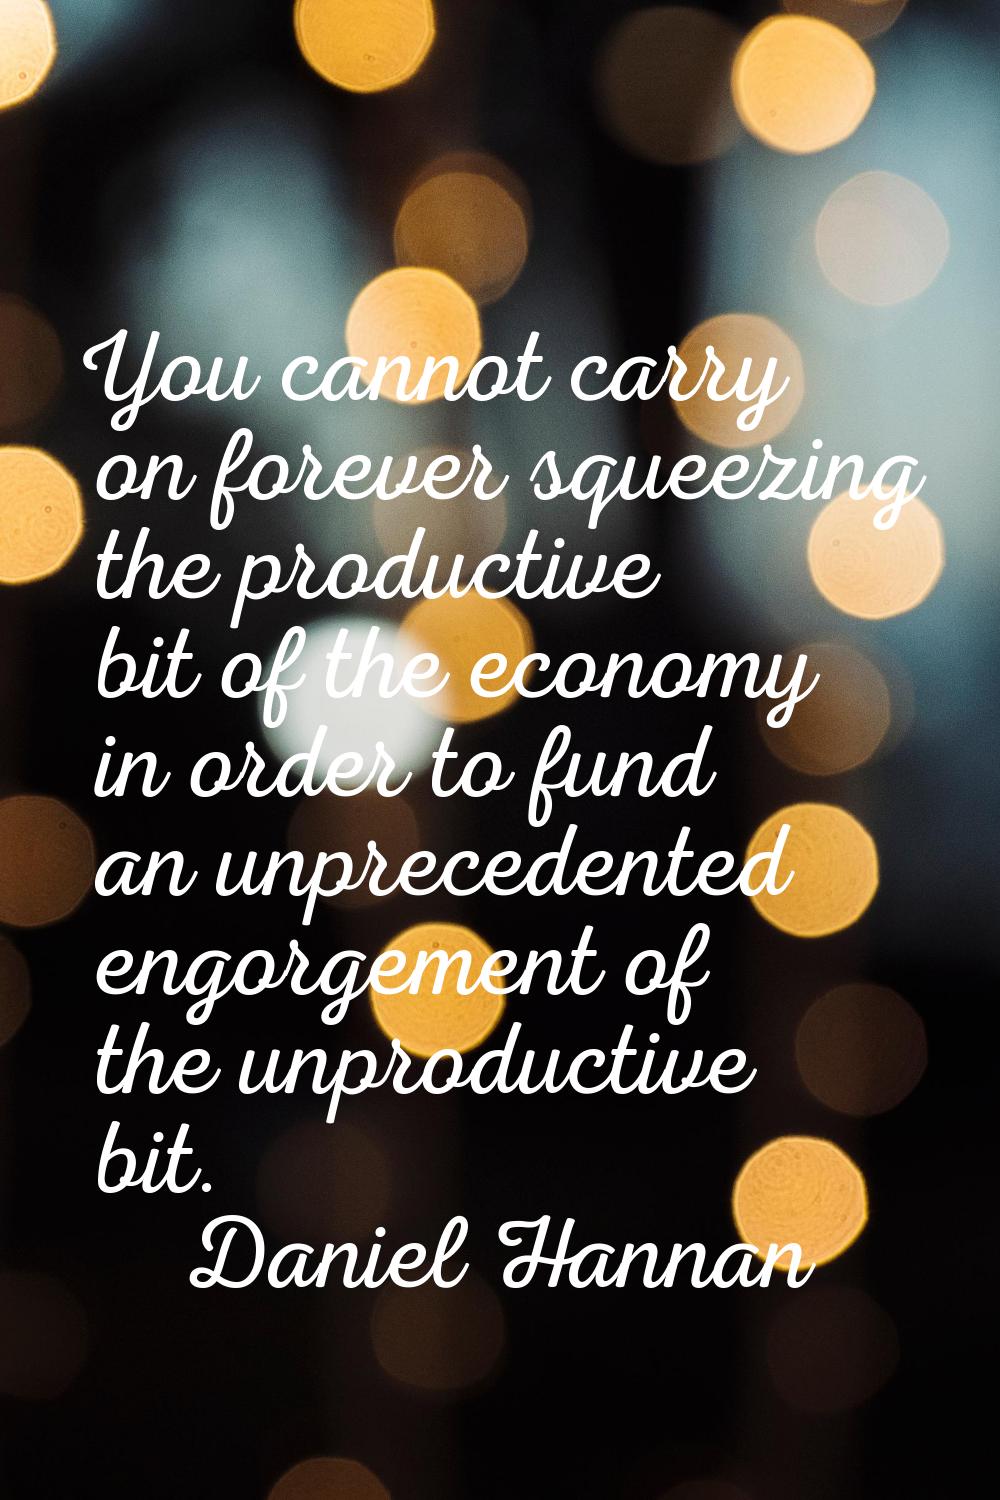 You cannot carry on forever squeezing the productive bit of the economy in order to fund an unprece